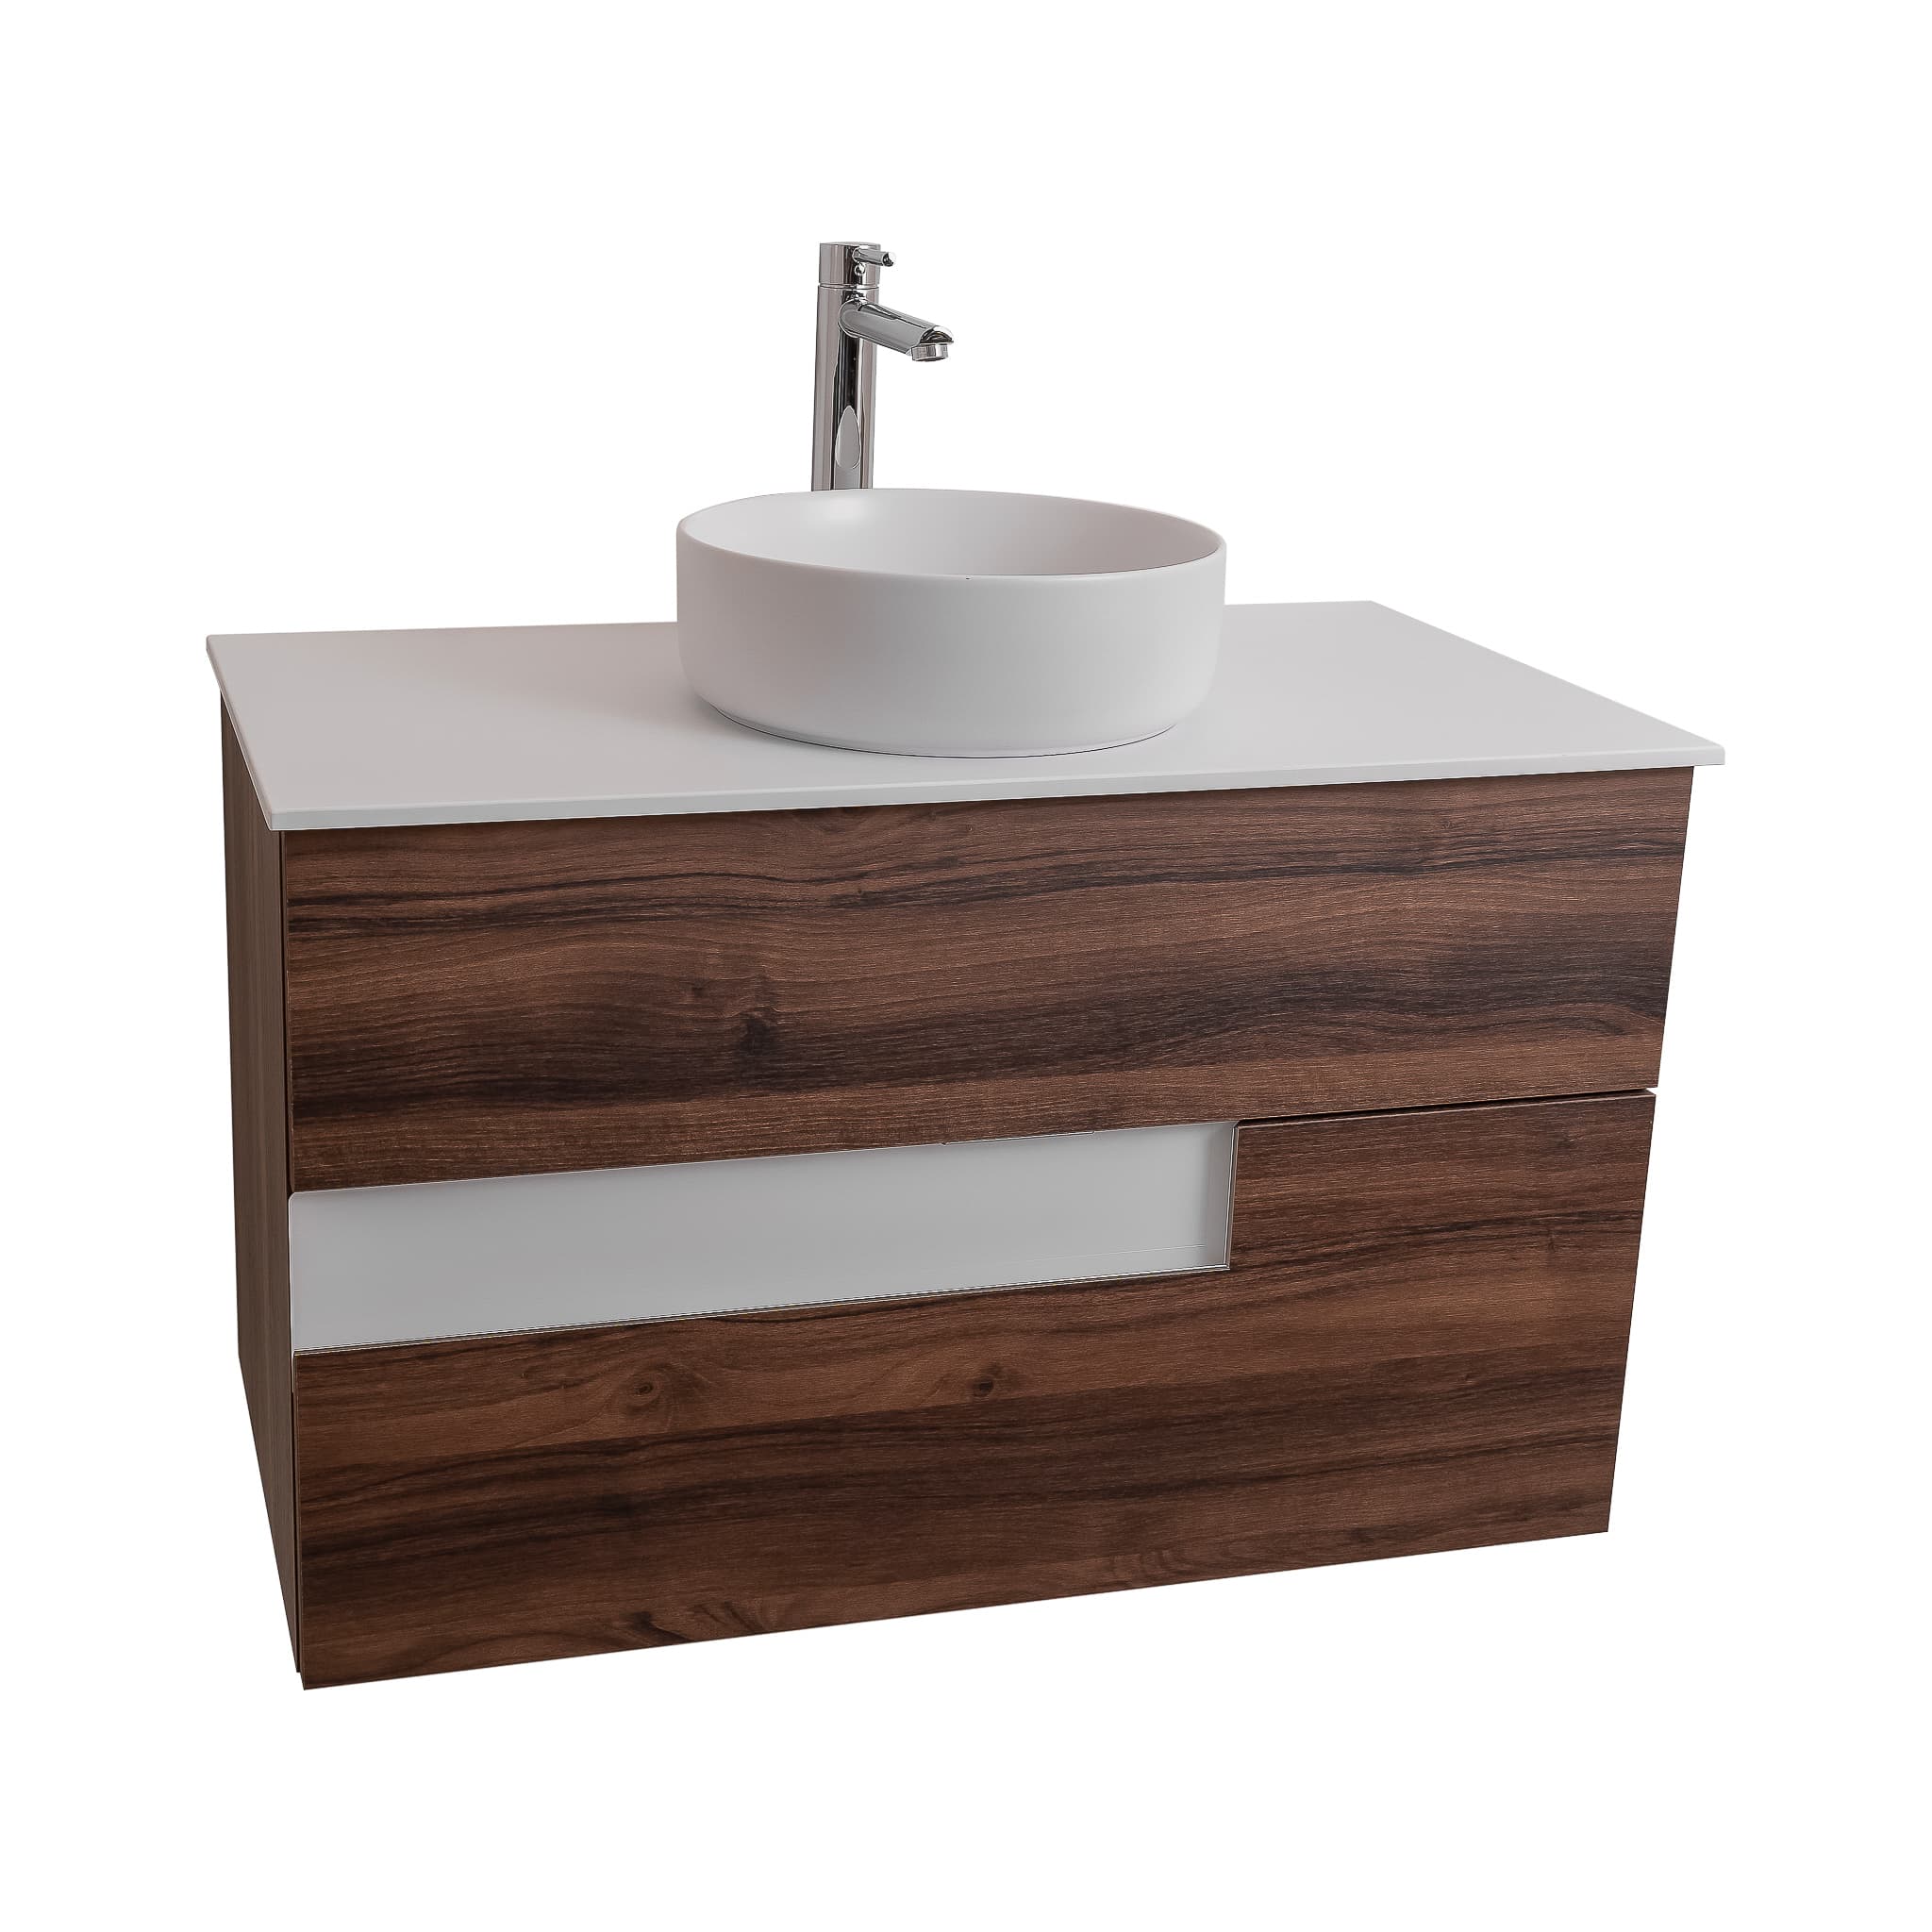 Vision 35.5 Valenti Medium Brown Wood Cabinet, Ares White Top And Ares White Ceramic Basin, Wall Mounted Modern Vanity Set